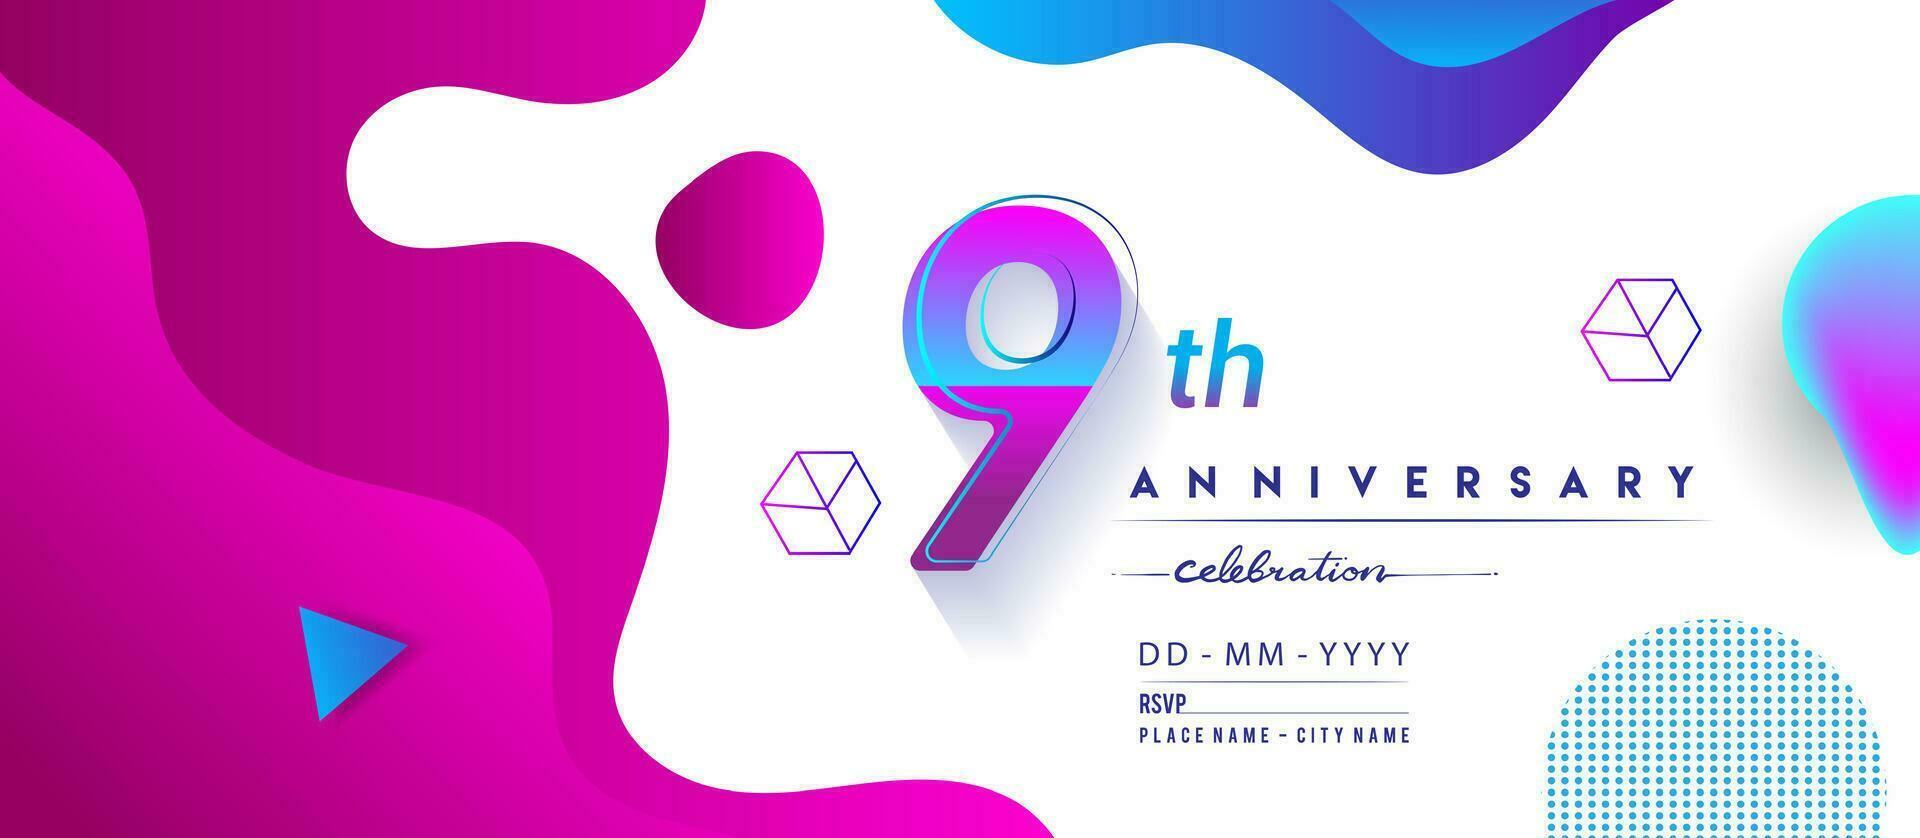 9th years anniversary logo, vector design birthday celebration with colorful geometric background and circles shape.